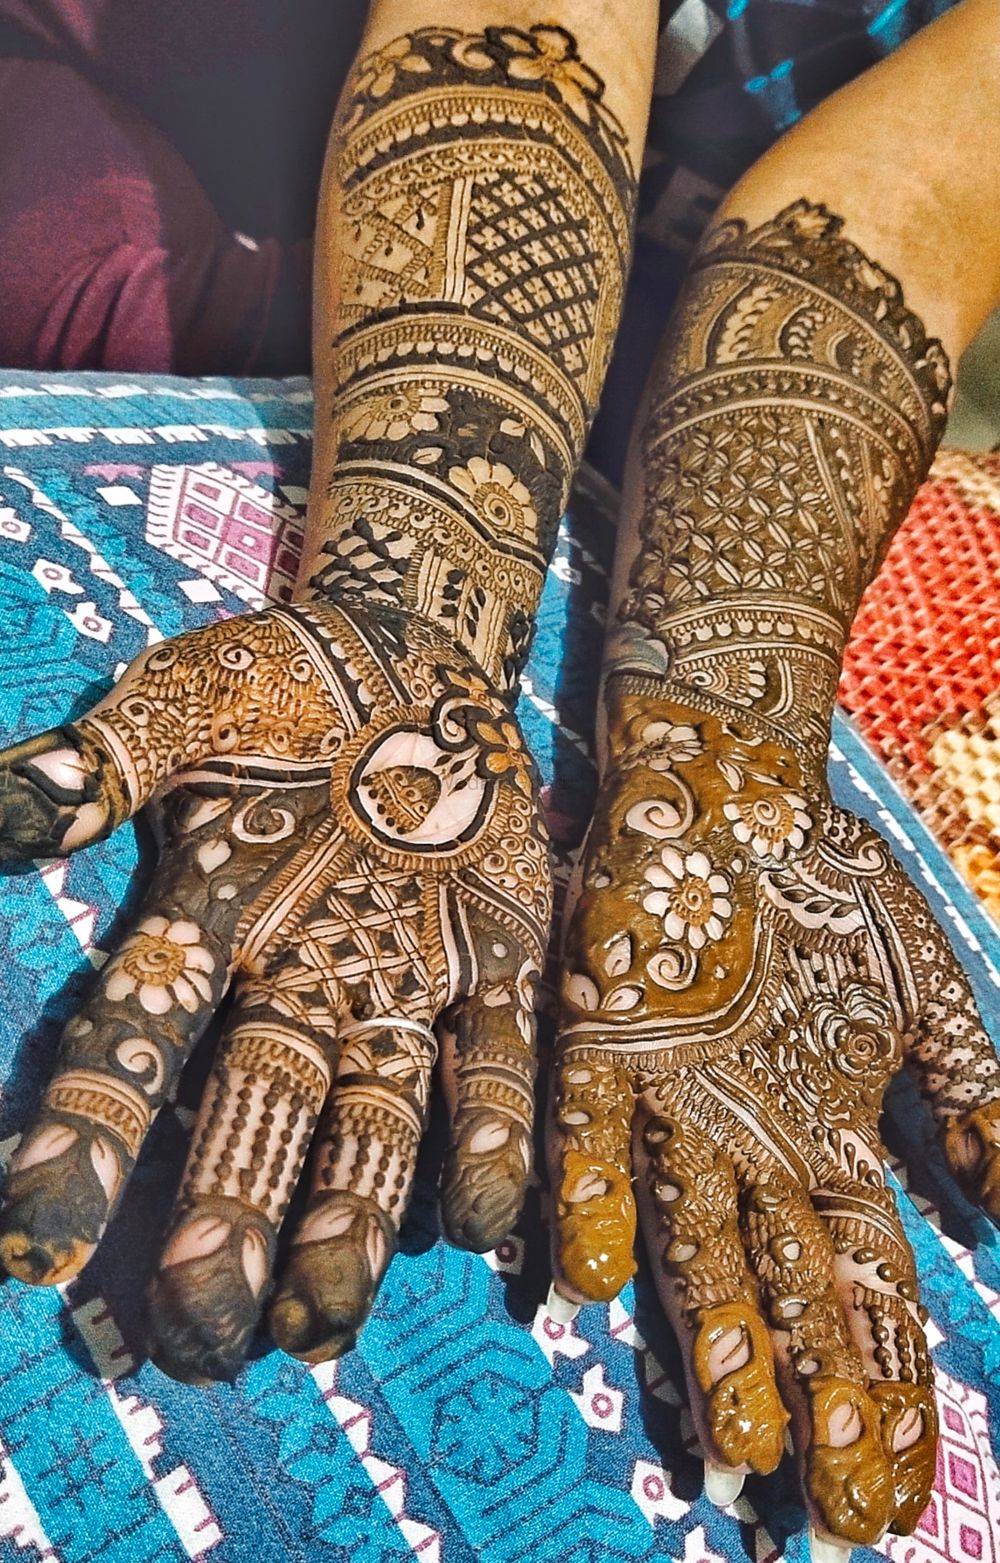 Photo From My 2020 brides - By Lovers Mehndi